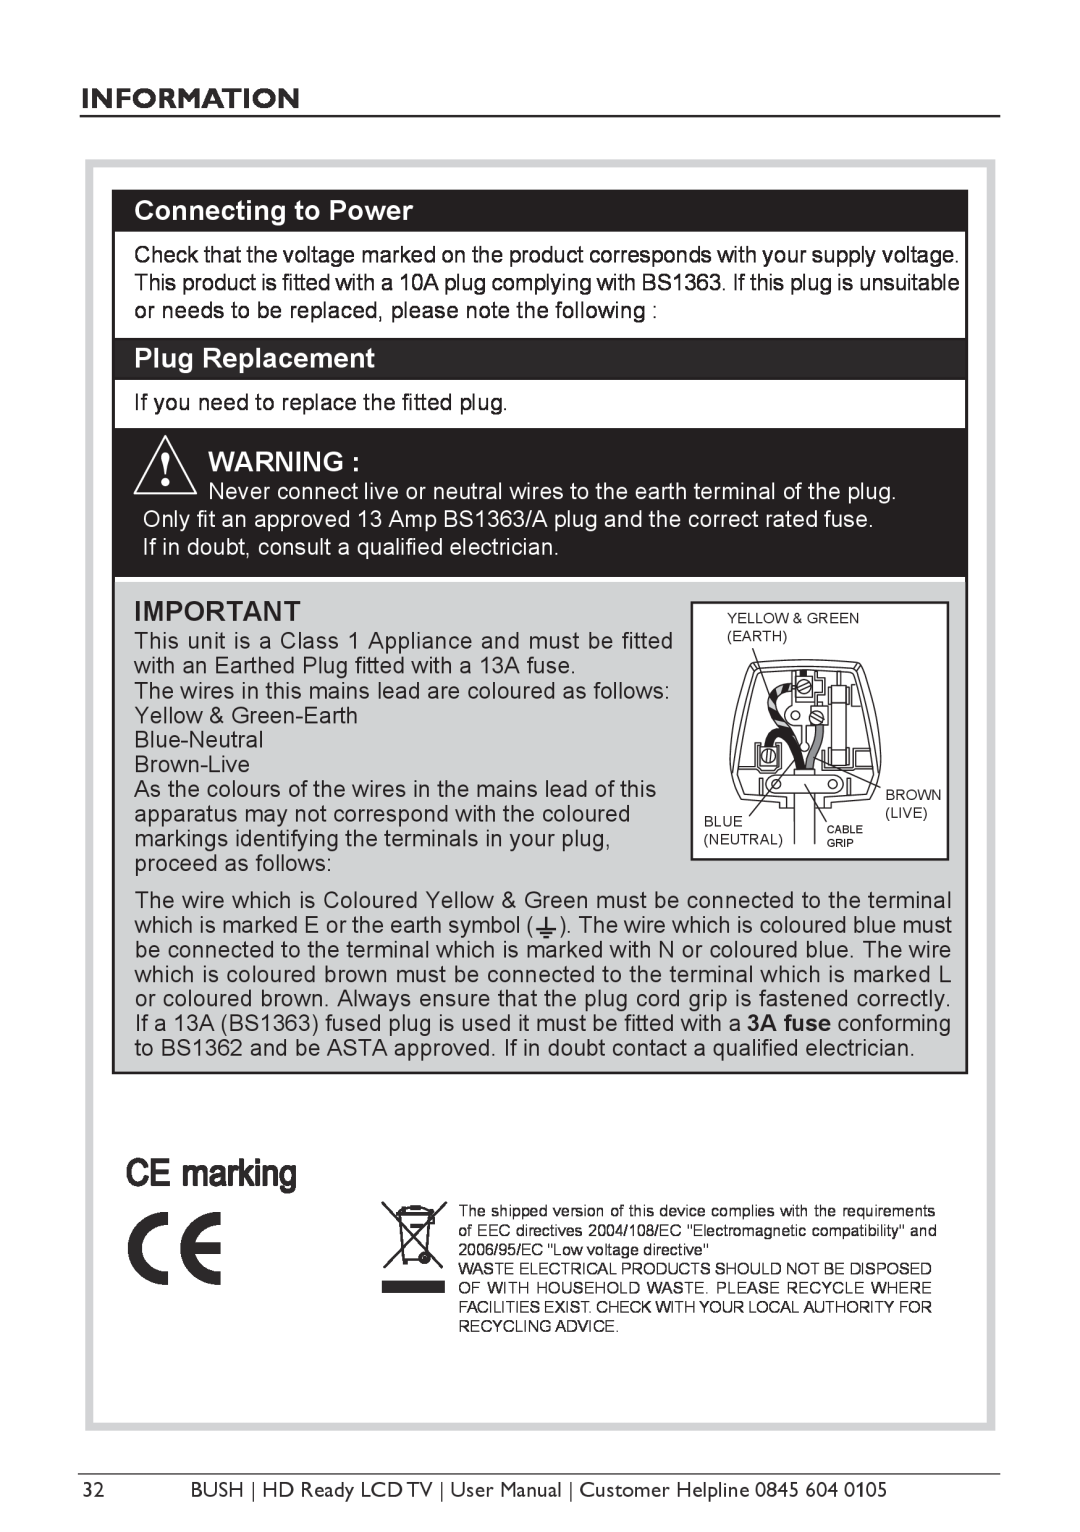 Bush A642N, A632N, Aseries, A626N instruction manual Information, CE marking, Connecting to Power, Plug Replacement 